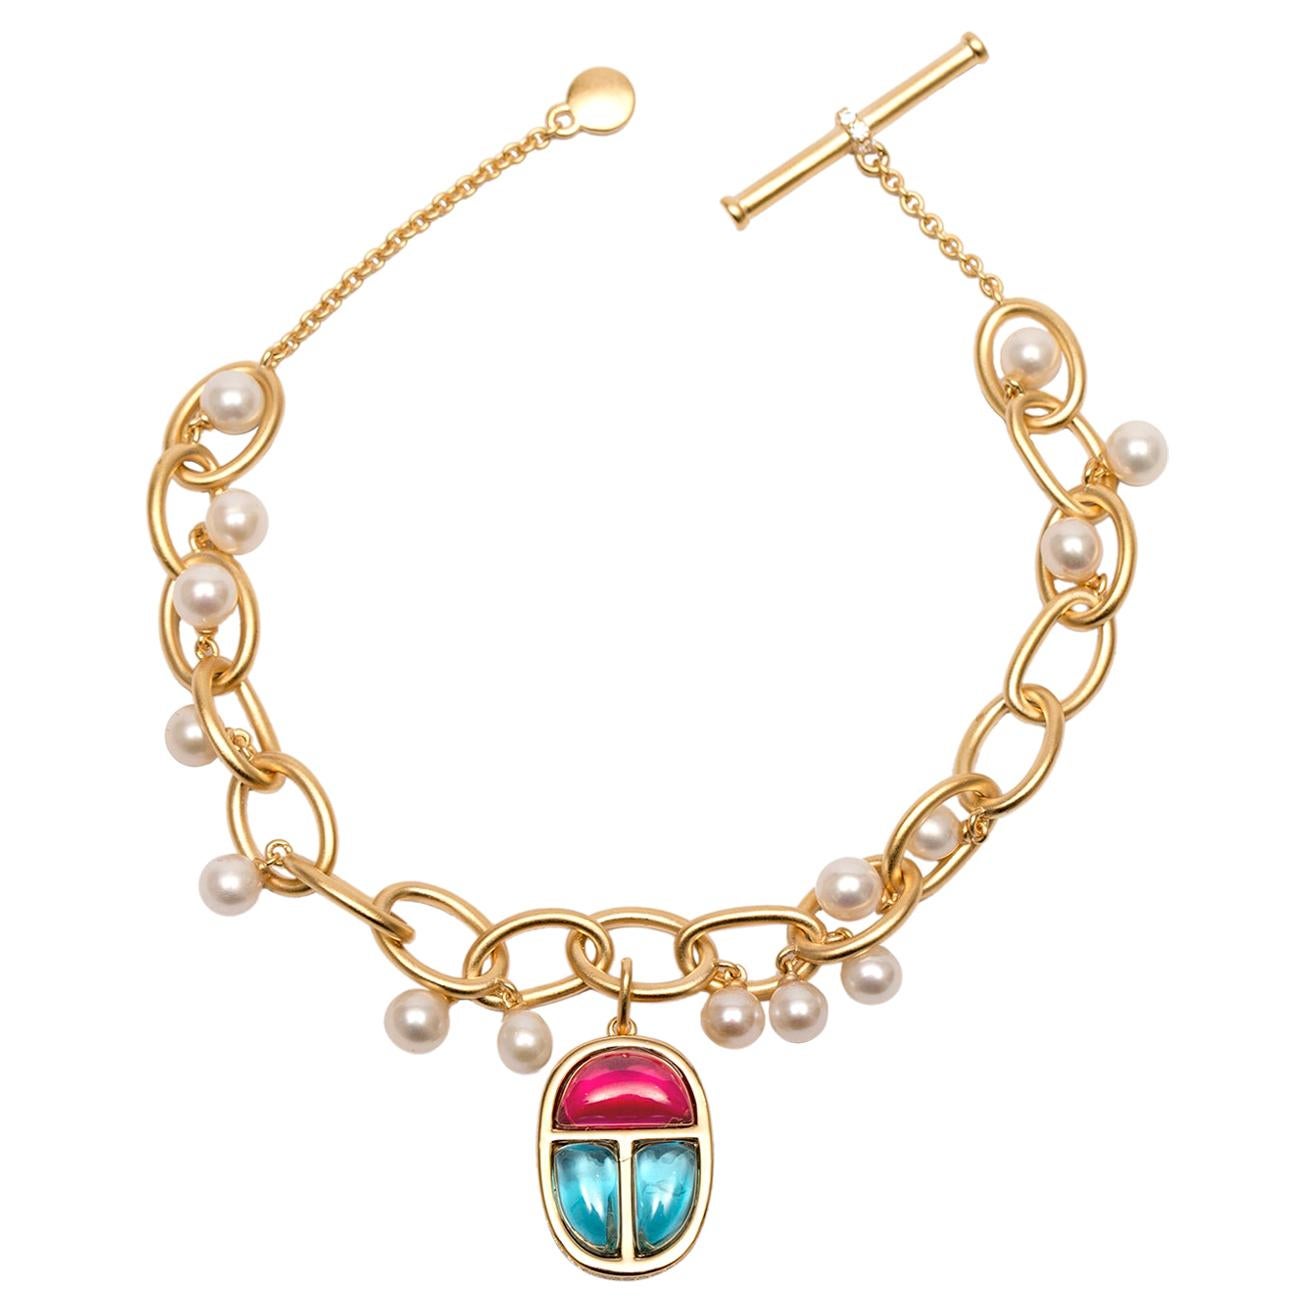 Links Bracelet Vermeil Gold with Scarab Amulet Charm and Pearls